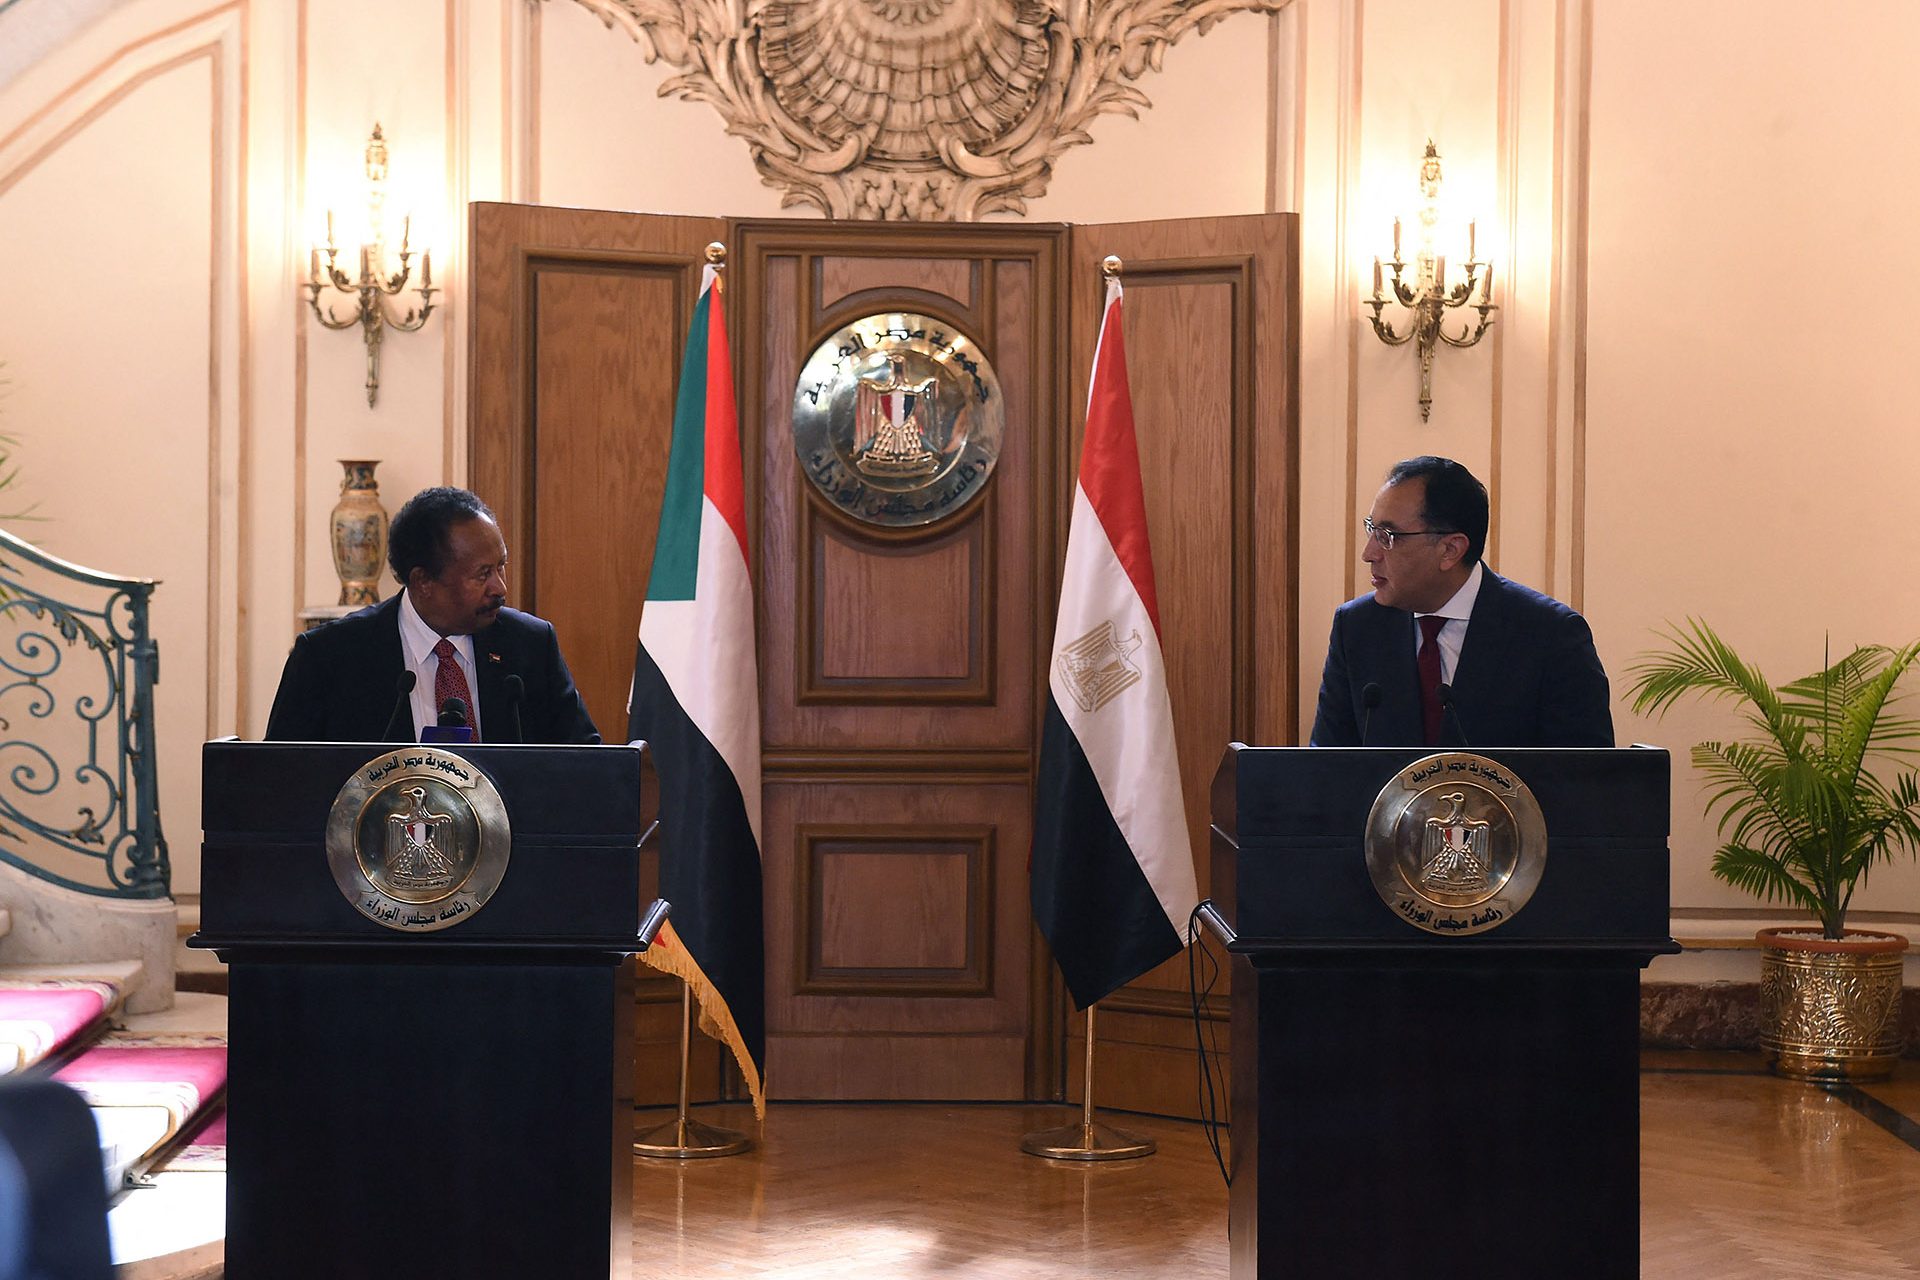 Continuing controversy with Egypt and Sudan